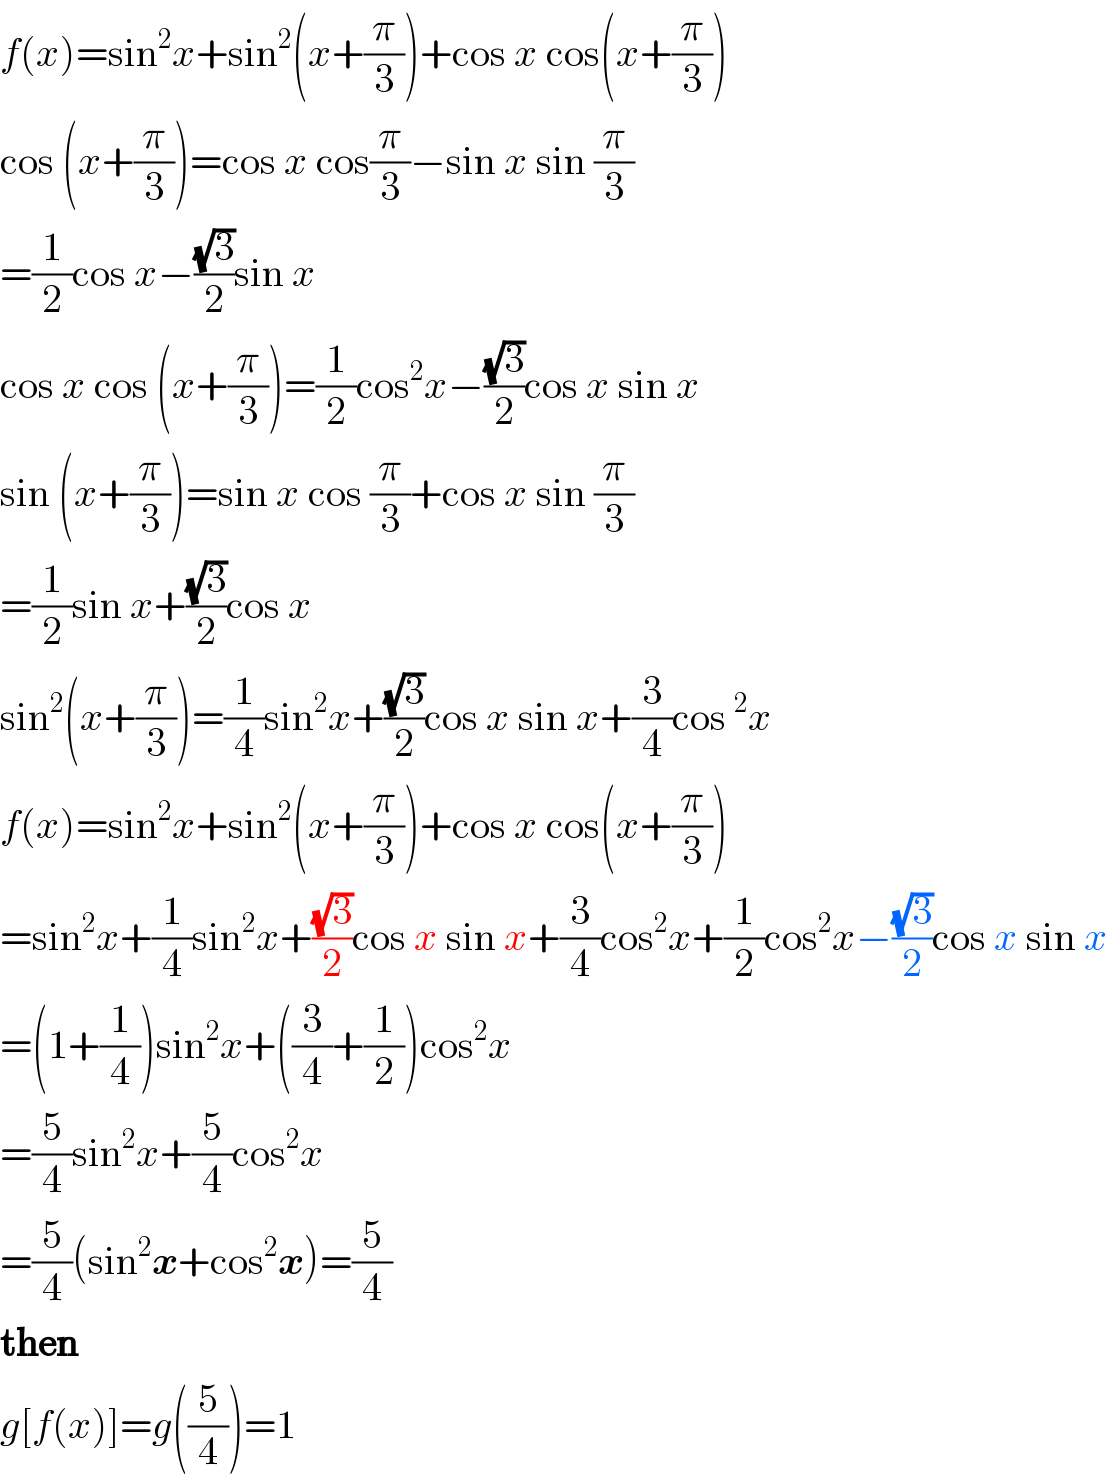 f(x)=sin^2 x+sin^2 (x+(π/3))+cos x cos(x+(π/3))  cos (x+(π/3))=cos x cos(π/3)−sin x sin (π/3)   =(1/2)cos x−((√3)/2)sin x  cos x cos (x+(π/3))=(1/2)cos^2 x−((√3)/2)cos x sin x  sin (x+(π/3))=sin x cos (π/3)+cos x sin (π/3)  =(1/2)sin x+((√3)/2)cos x  sin^2 (x+(π/3))=(1/4)sin^2 x+((√3)/2)cos x sin x+(3/4)cos^2 x  f(x)=sin^2 x+sin^2 (x+(π/3))+cos x cos(x+(π/3))  =sin^2 x+(1/4)sin^2 x+((√3)/2)cos x sin x+(3/4)cos^2 x+(1/2)cos^2 x−((√3)/2)cos x sin x  =(1+(1/4))sin^2 x+((3/4)+(1/2))cos^2 x  =(5/4)sin^2 x+(5/4)cos^2 x  =(5/4)(sin^2 x+cos^2 x)=(5/4)  then  g[f(x)]=g((5/4))=1  